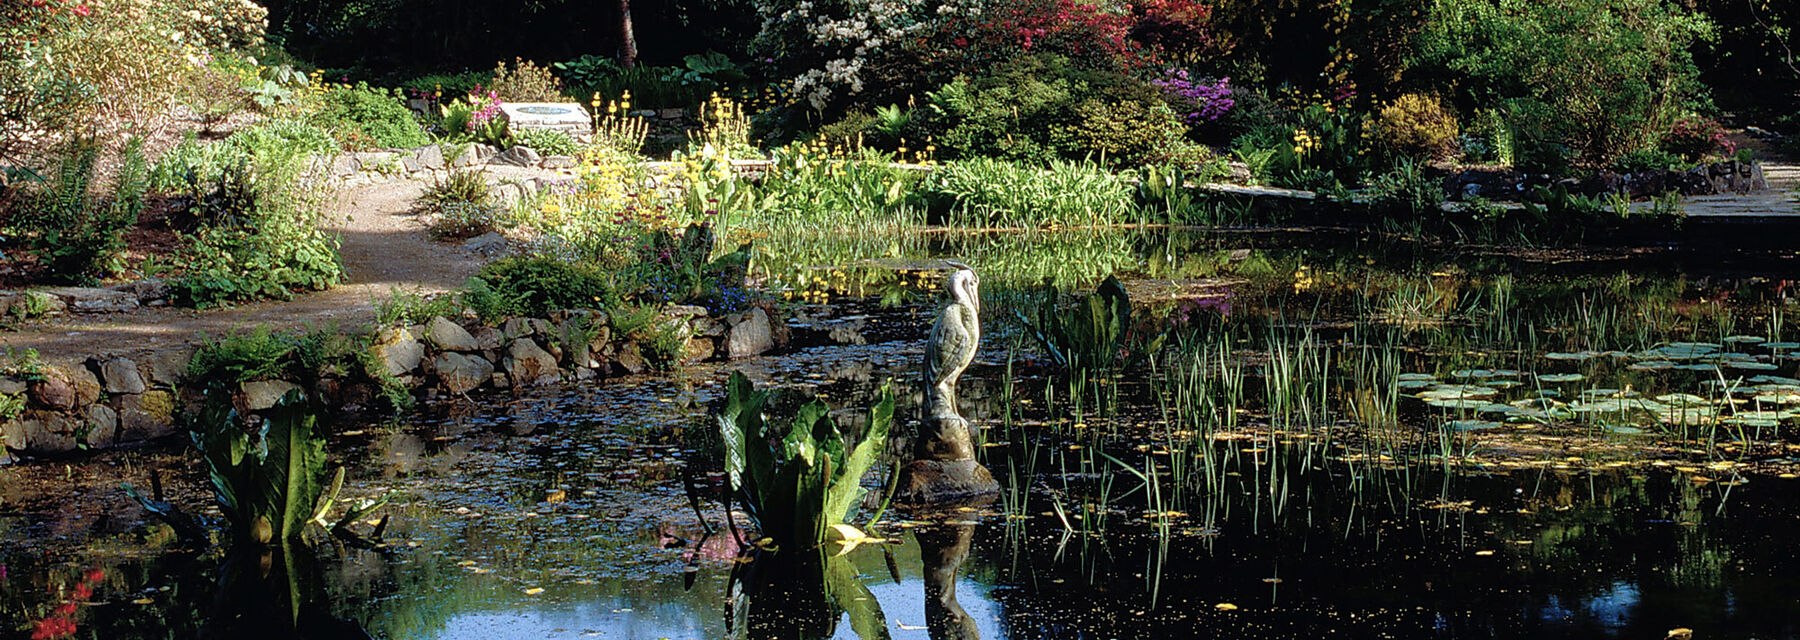 A pond in a garden, surrounded with colourful flower beds and rhododendrons in bloom. A statue of a heron stands in the middle of the pond.